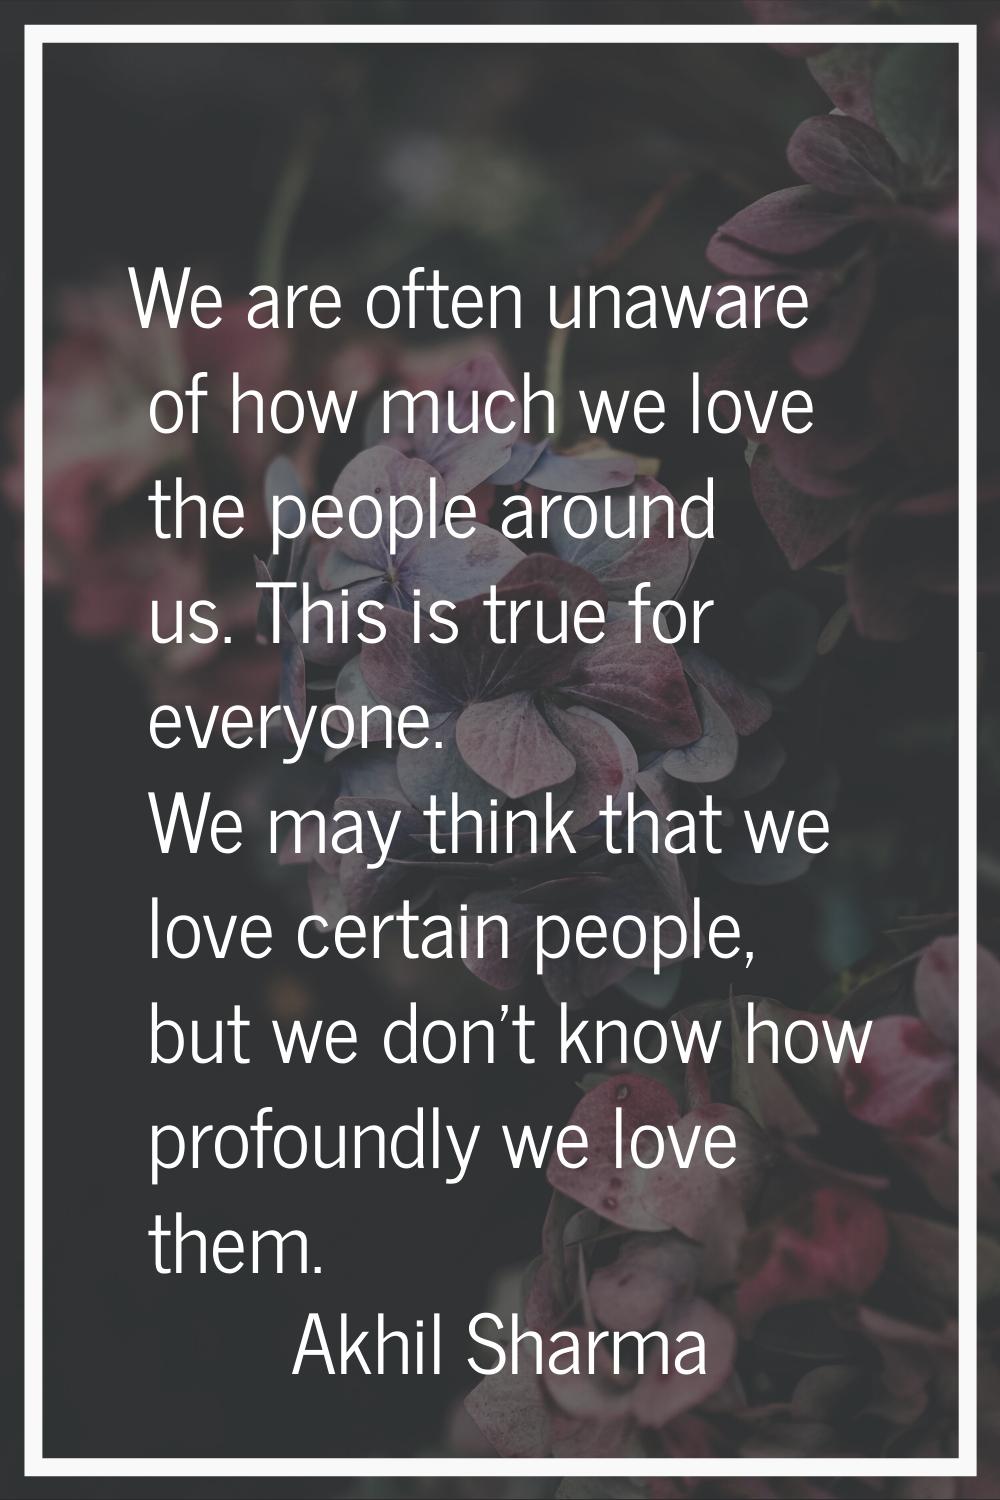 We are often unaware of how much we love the people around us. This is true for everyone. We may th